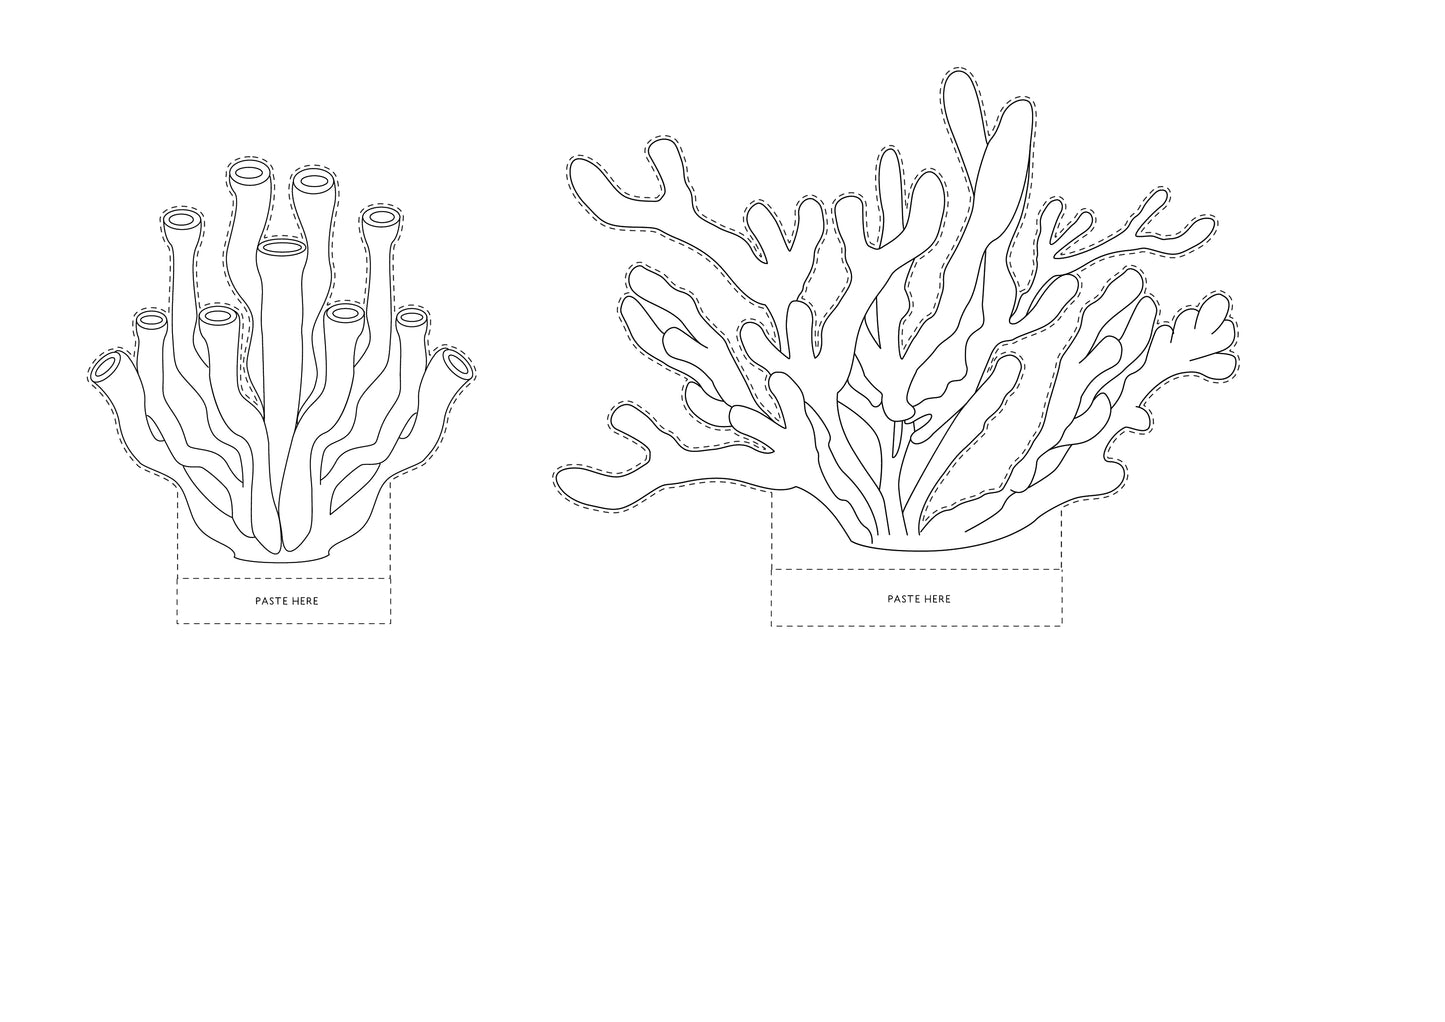 Printable Coral Reef Diorama (7 Pages)